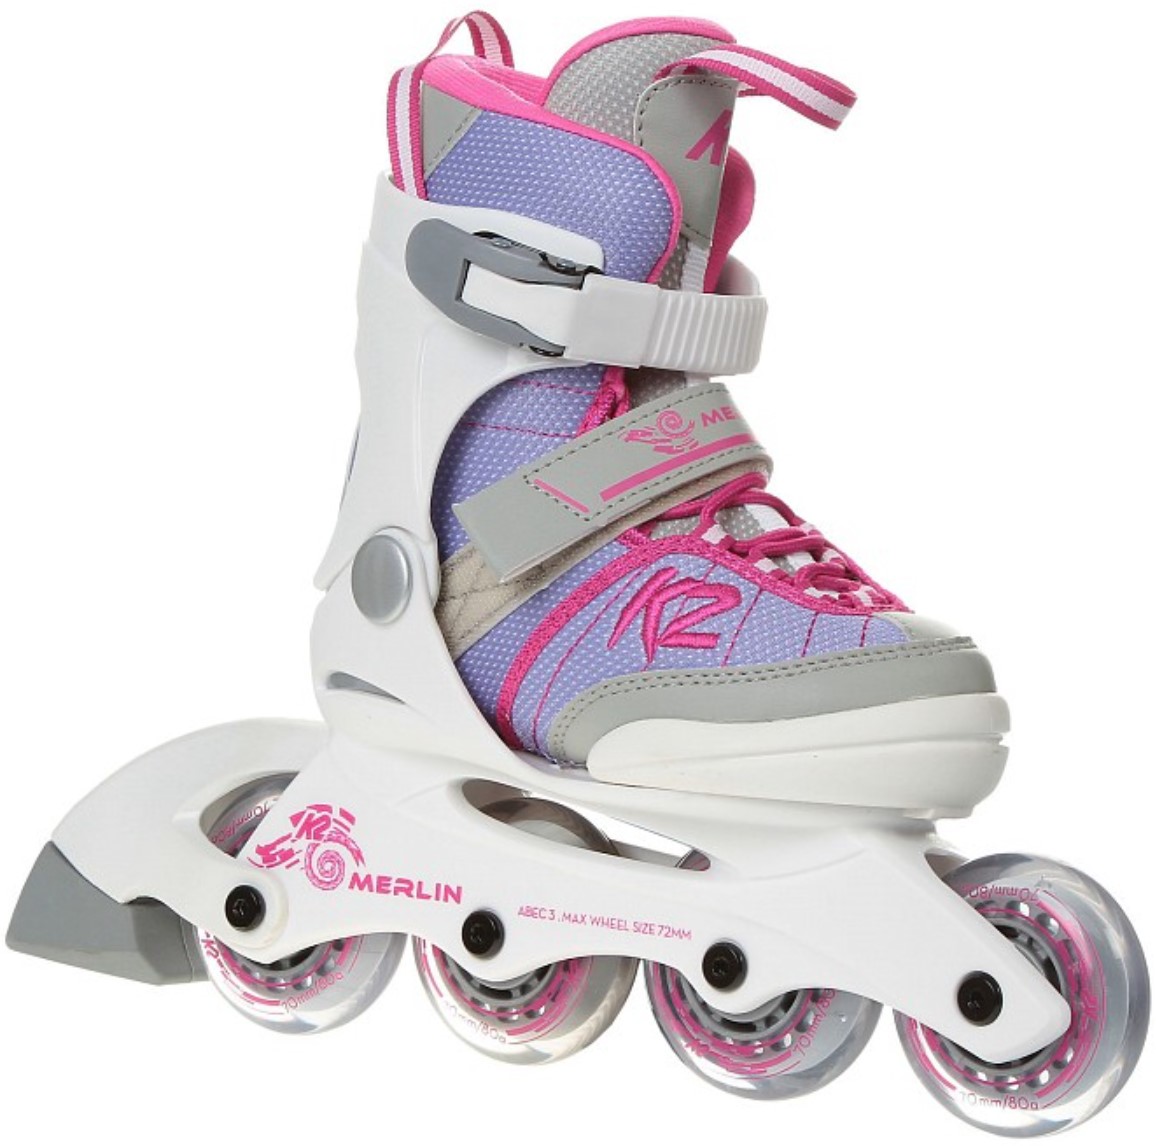 K2 Youth Skate Merlin Girl with pink touch